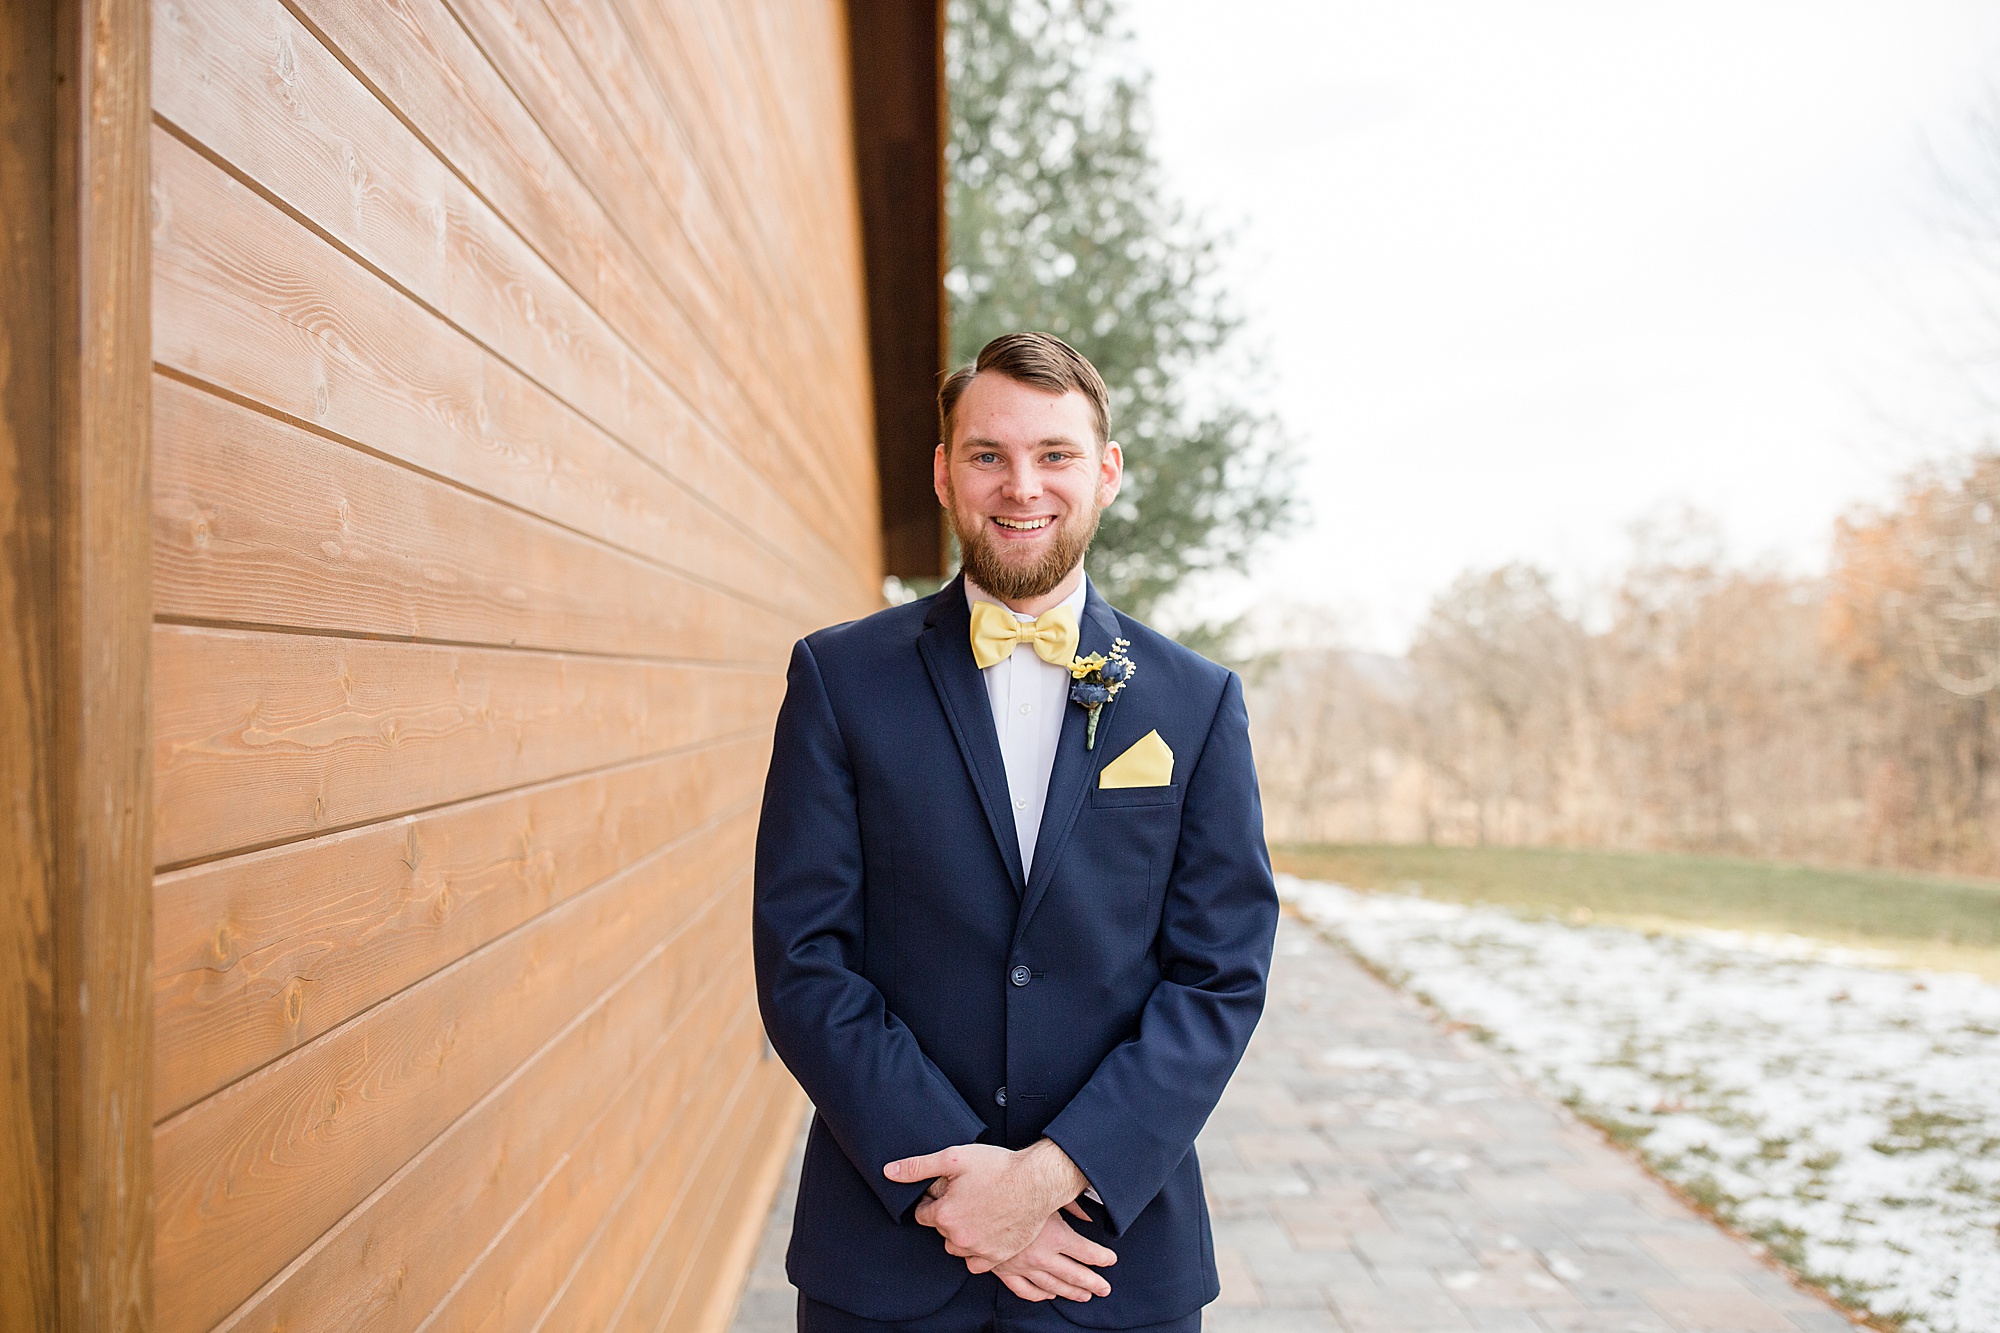 groom poses in navy suit with yellow pocket square